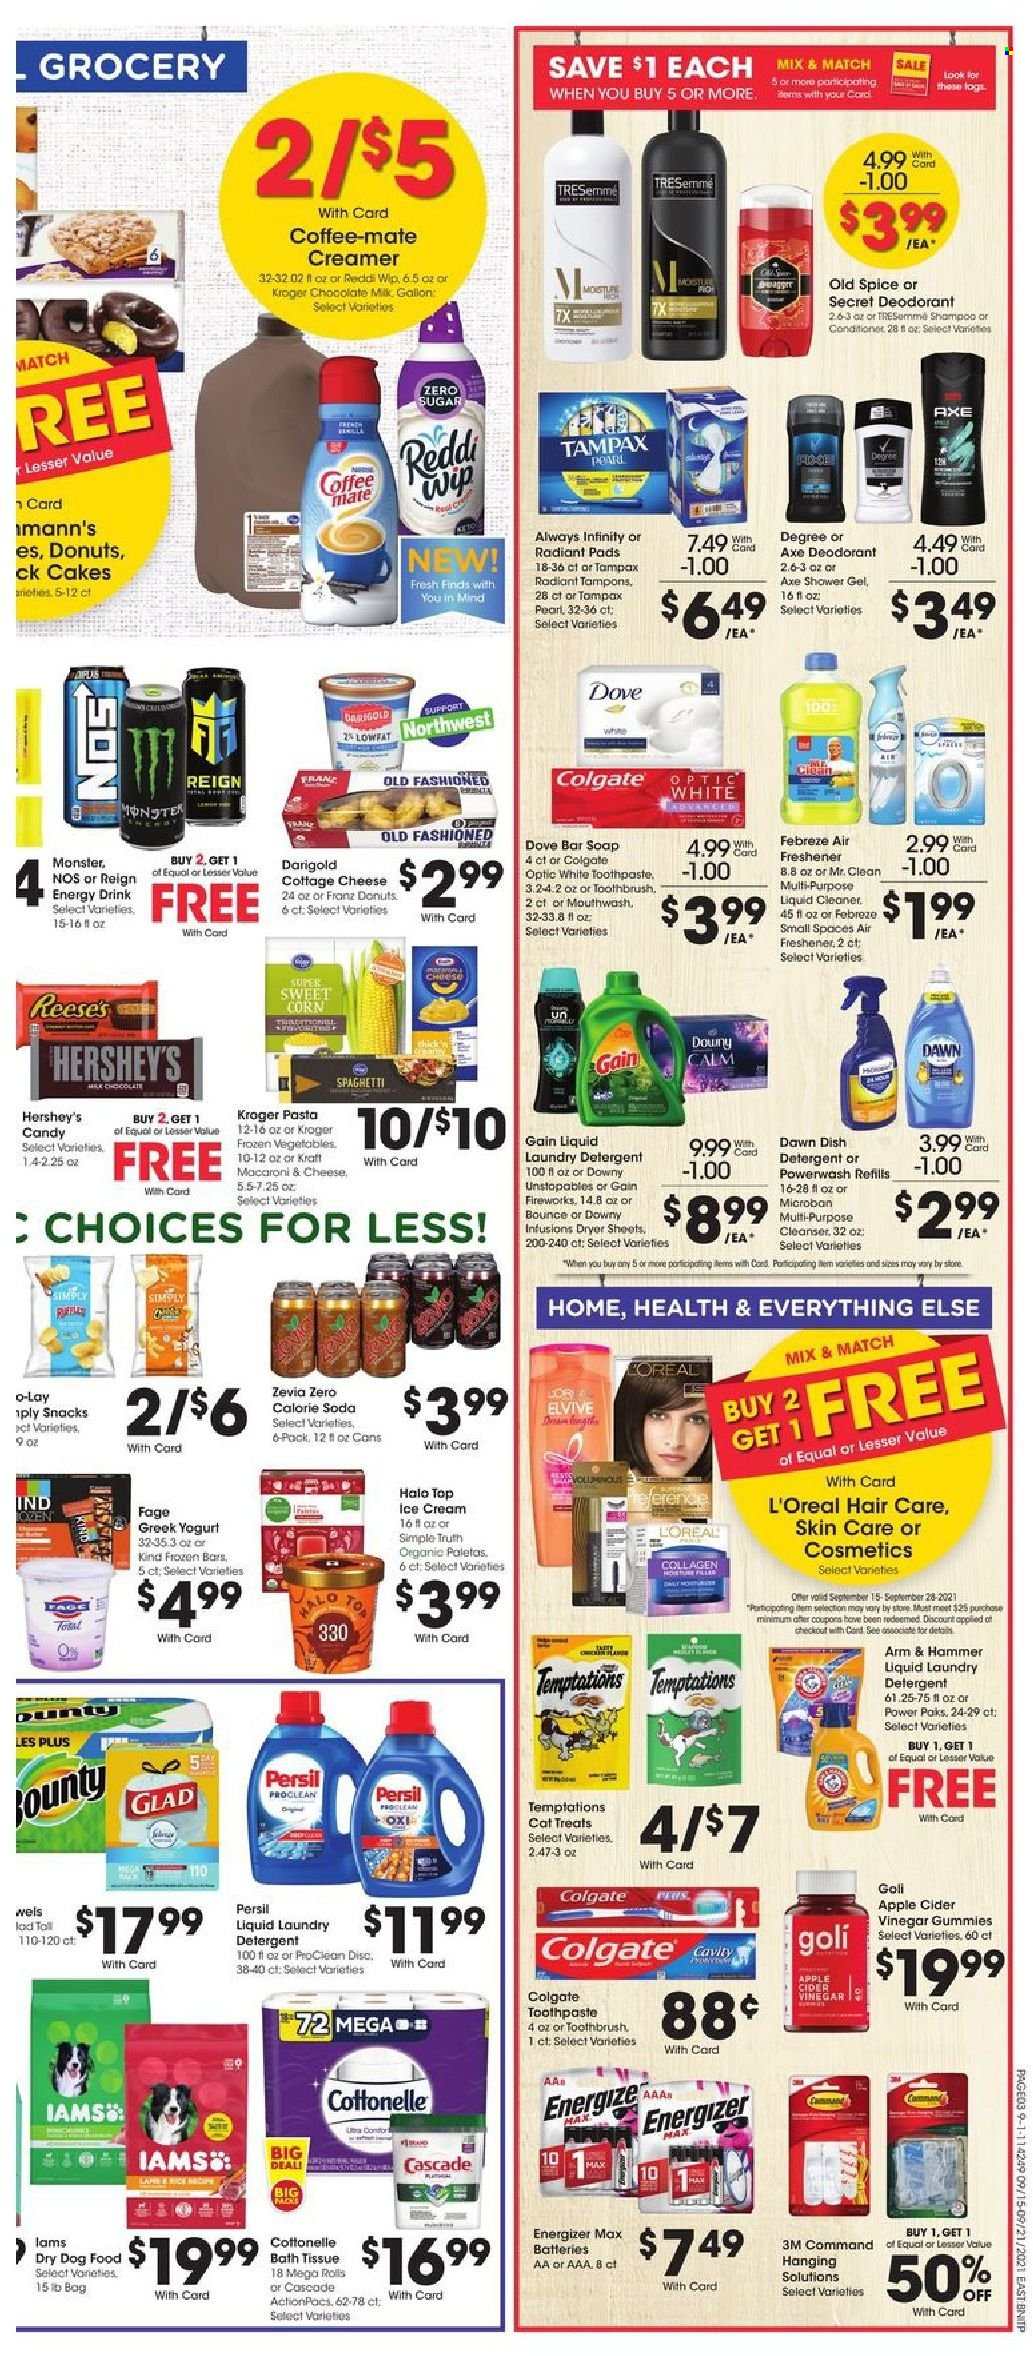 thumbnail - Fred Meyer Flyer - 09/15/2021 - 09/21/2021 - Sales products - cake, donut, corn, sweet corn, macaroni & cheese, spaghetti, pasta, cottage cheese, greek yoghurt, yoghurt, Coffee-Mate, creamer, Reese's, Hershey's, frozen vegetables, chocolate, snack, ARM & HAMMER, spice, apple cider vinegar, vinegar, energy drink, Monster, soda, Dove, bath tissue, Cottonelle, detergent, Febreze, Gain, cleaner, liquid cleaner, Cascade, Unstopables, Persil, laundry detergent, dryer sheets, Gain Fireworks, Downy Laundry, shampoo, shower gel, Old Spice, soap bar, soap, Colgate, toothbrush, toothpaste, mouthwash, Tampax, tampons, Always Infinity, cleanser, L’Oréal, conditioner, TRESemmé, anti-perspirant, deodorant, air freshener, battery, Energizer, animal food, dog food, dry dog food, Iams. Page 6.